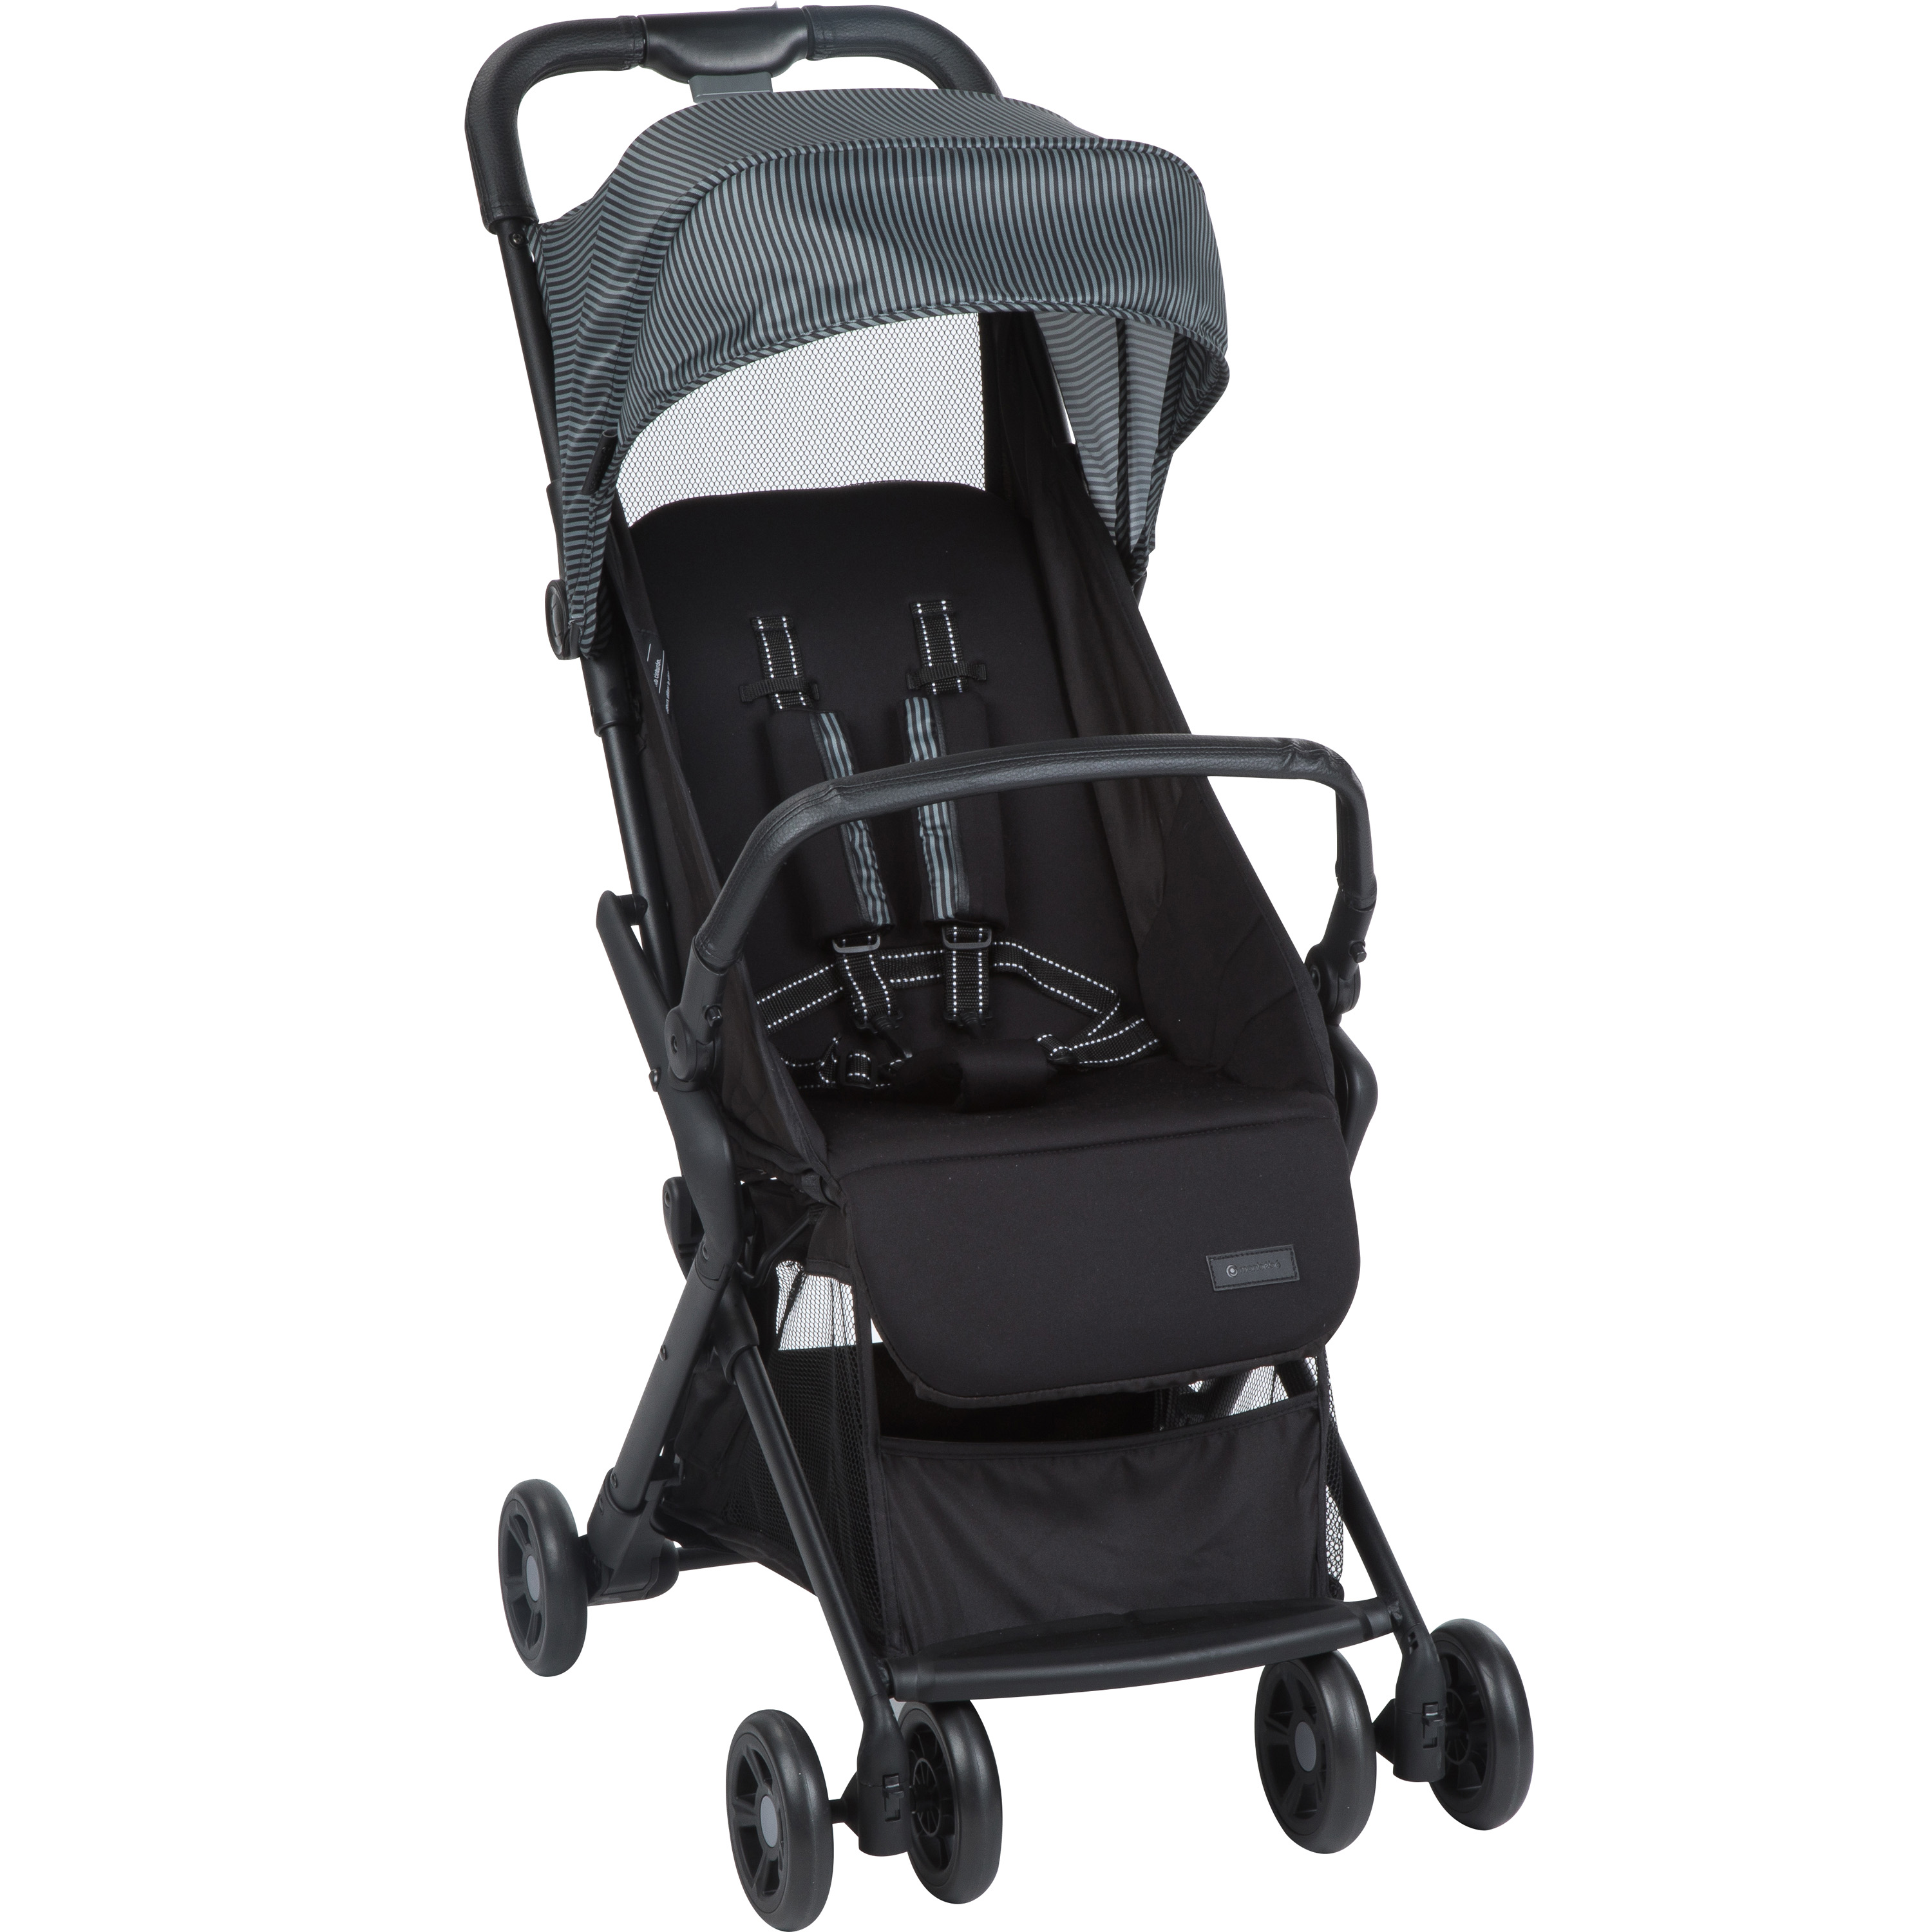 Monbebe Cube Compact Stroller, Gray and Black Pinstripe - image 1 of 10